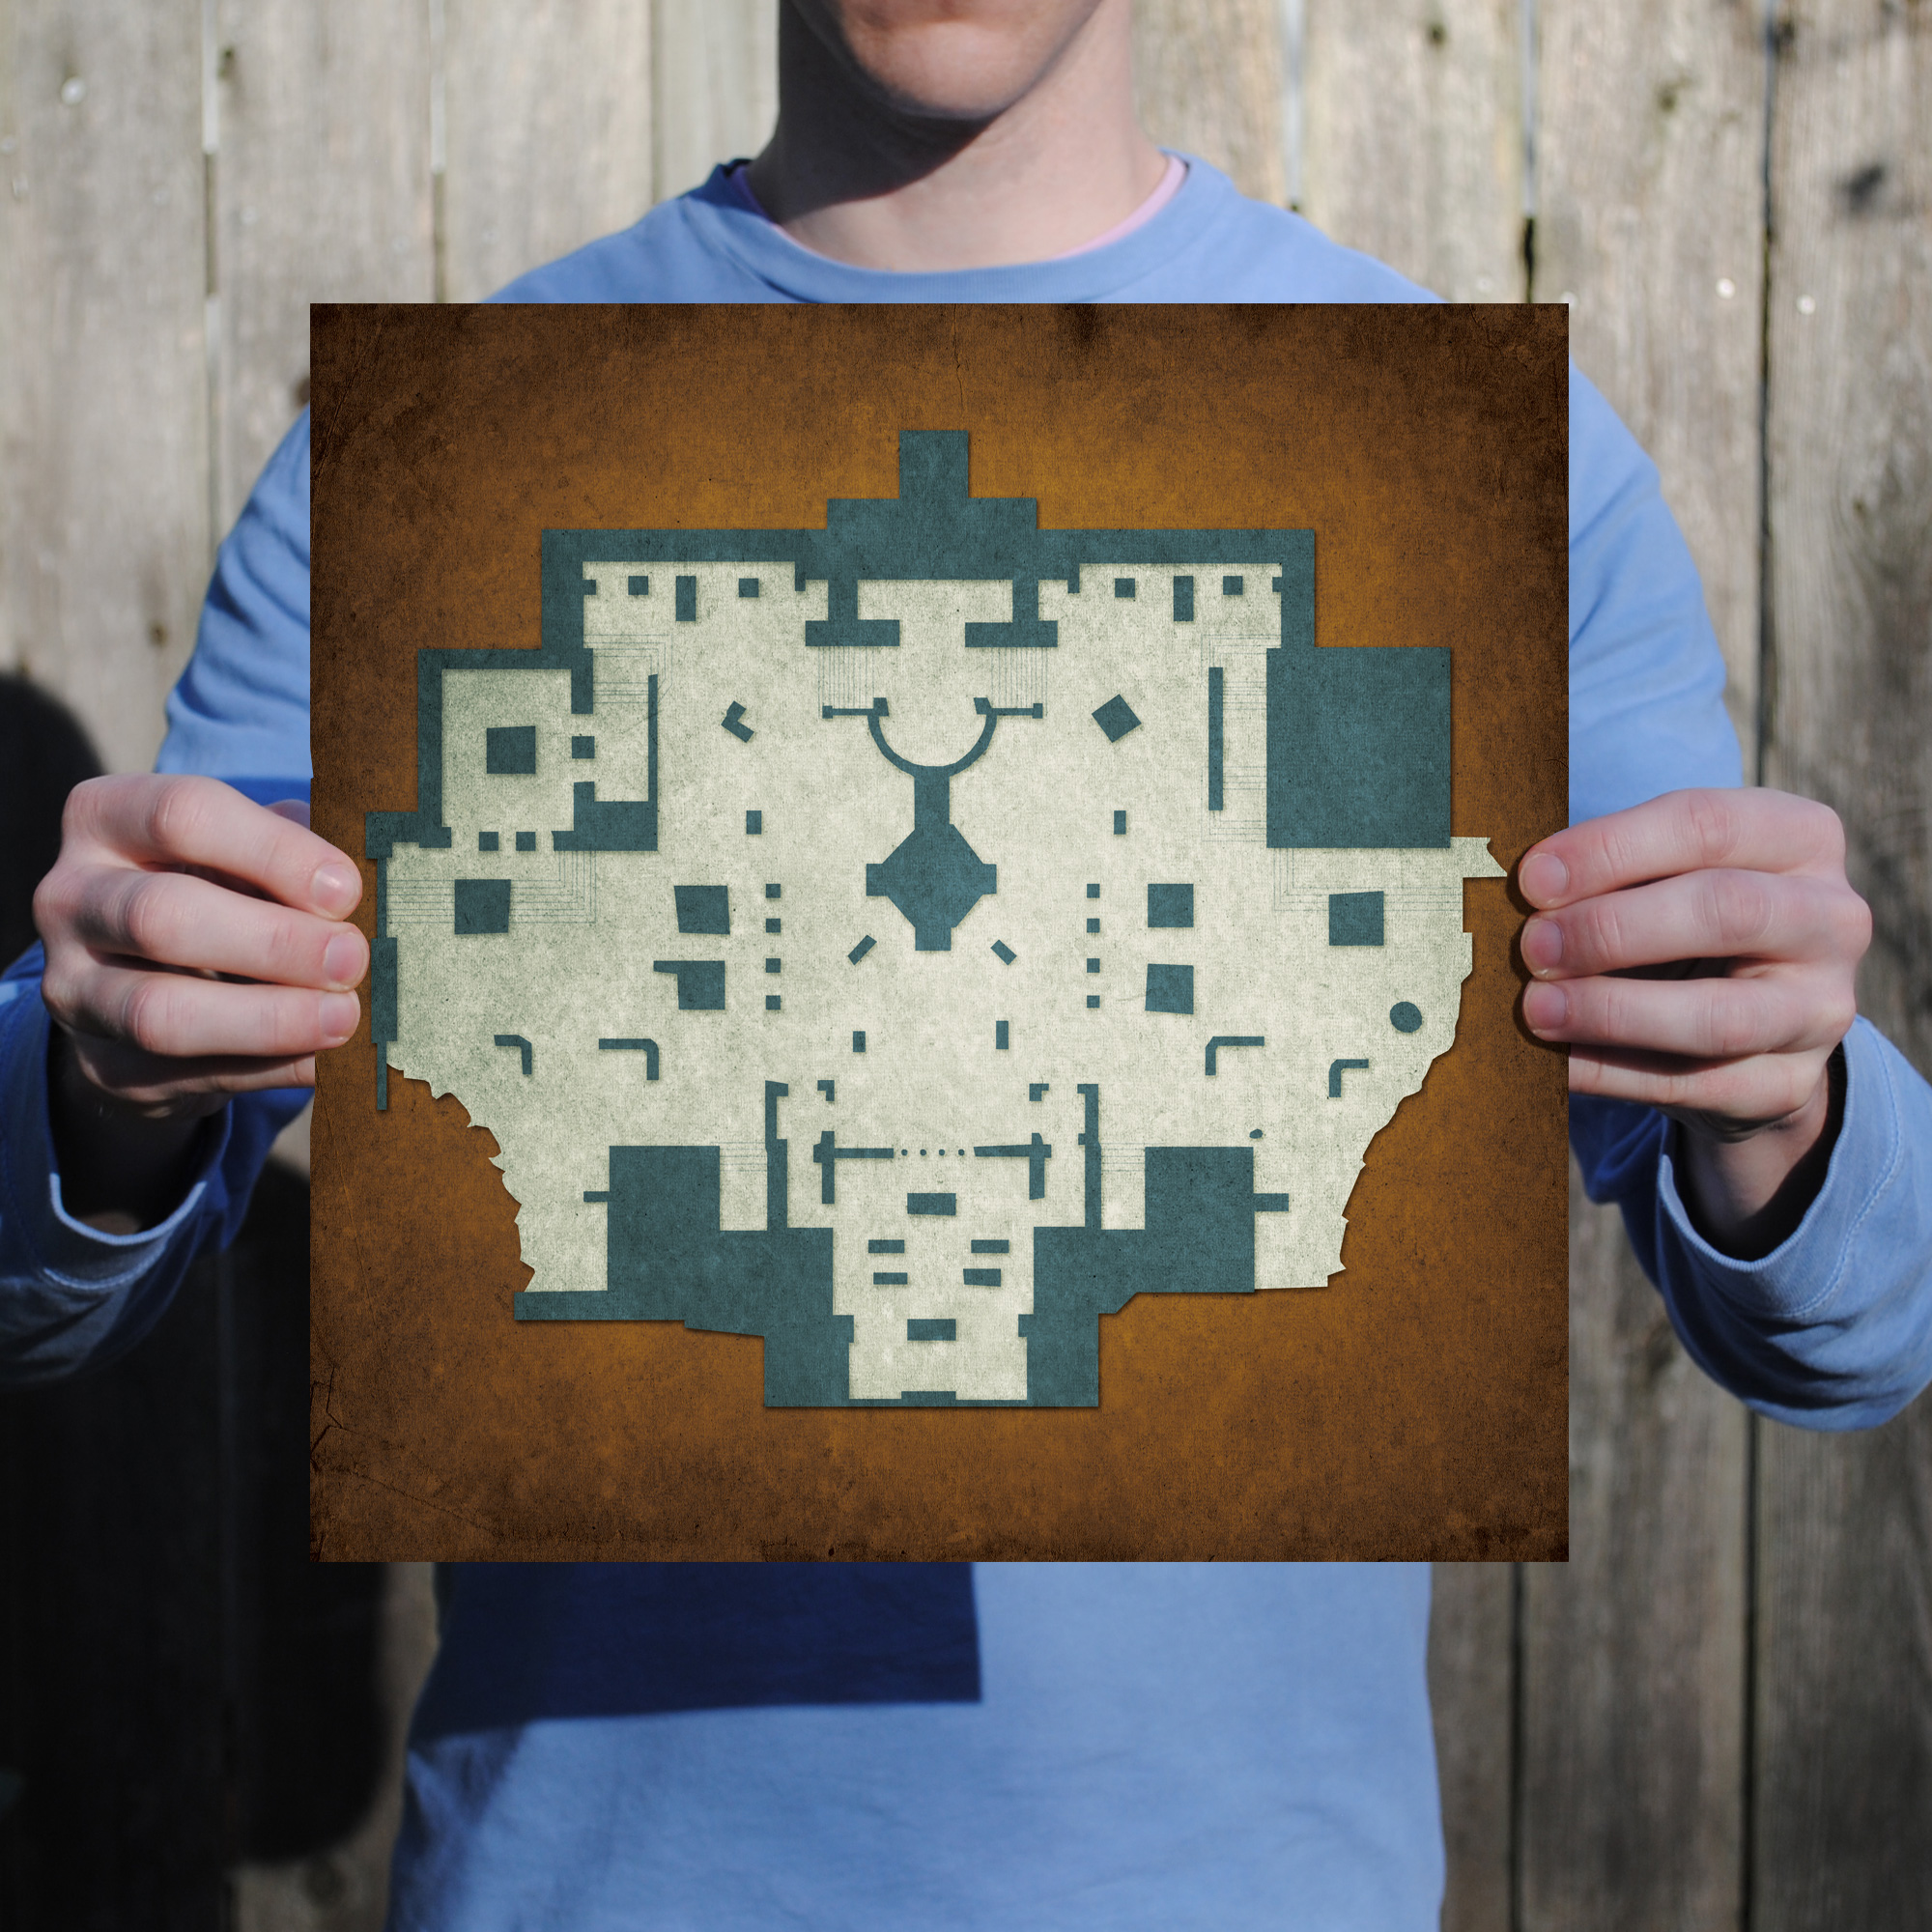 Gears of War, Mercy Map Art by City Prints - The Map Shop